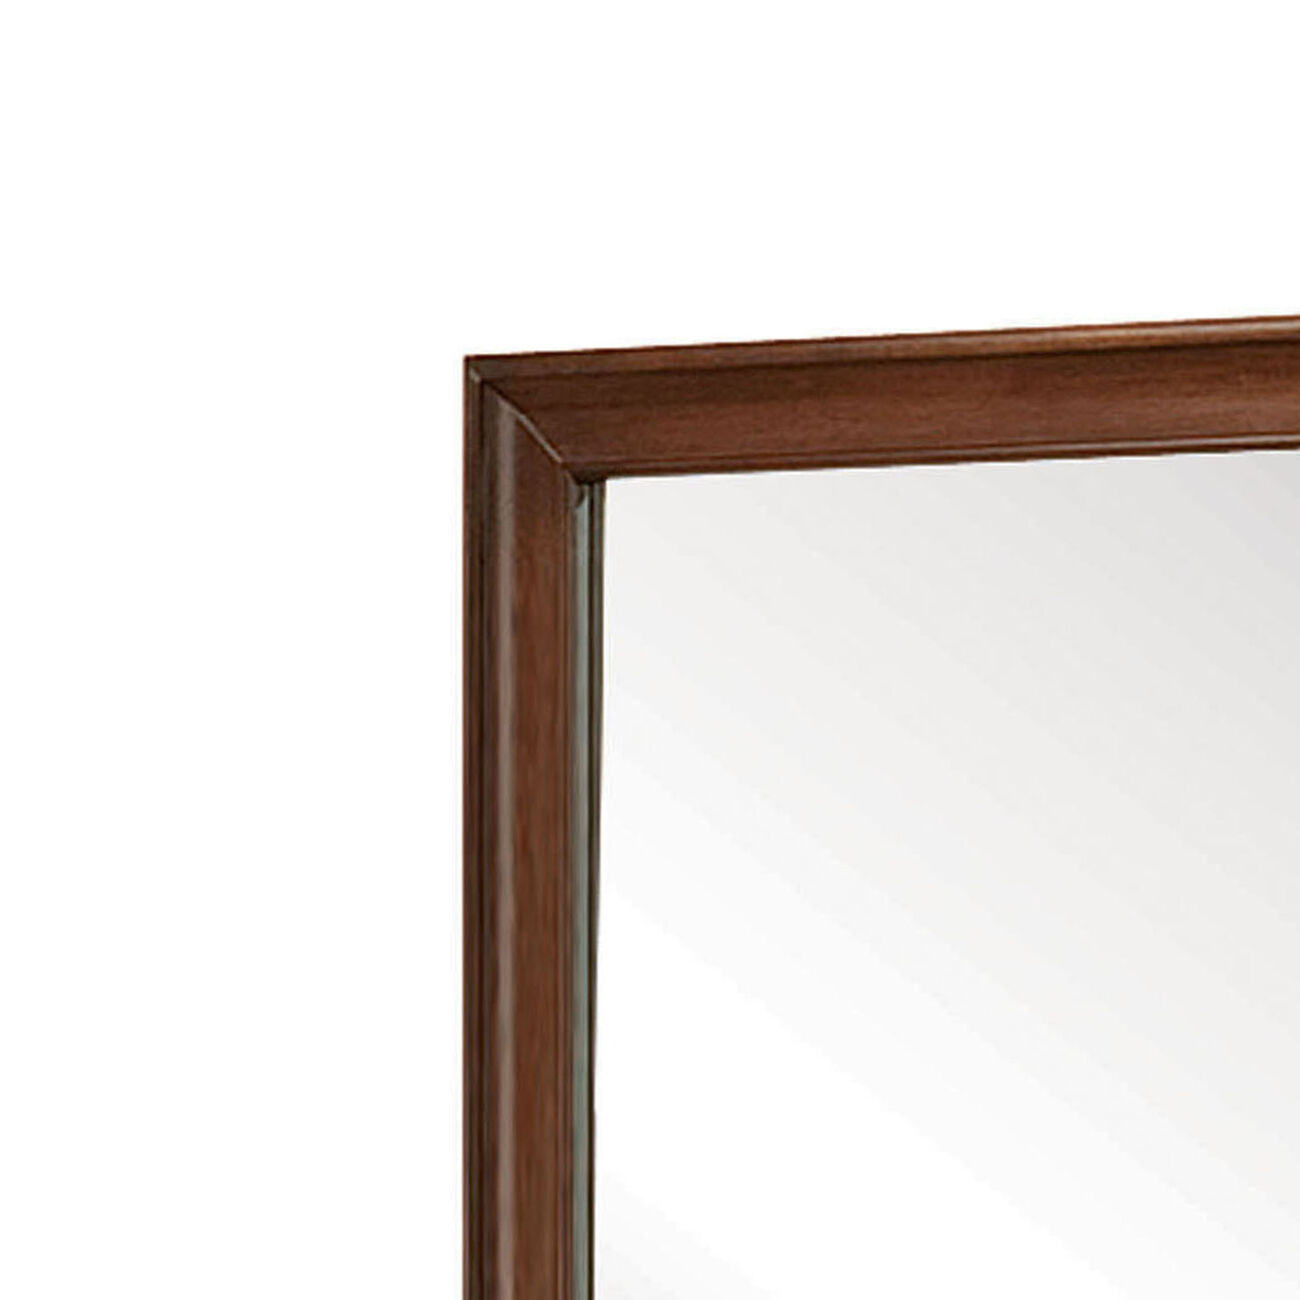 Transitional Style Wooden Mirror with Beveled Edge, Brown and Silver